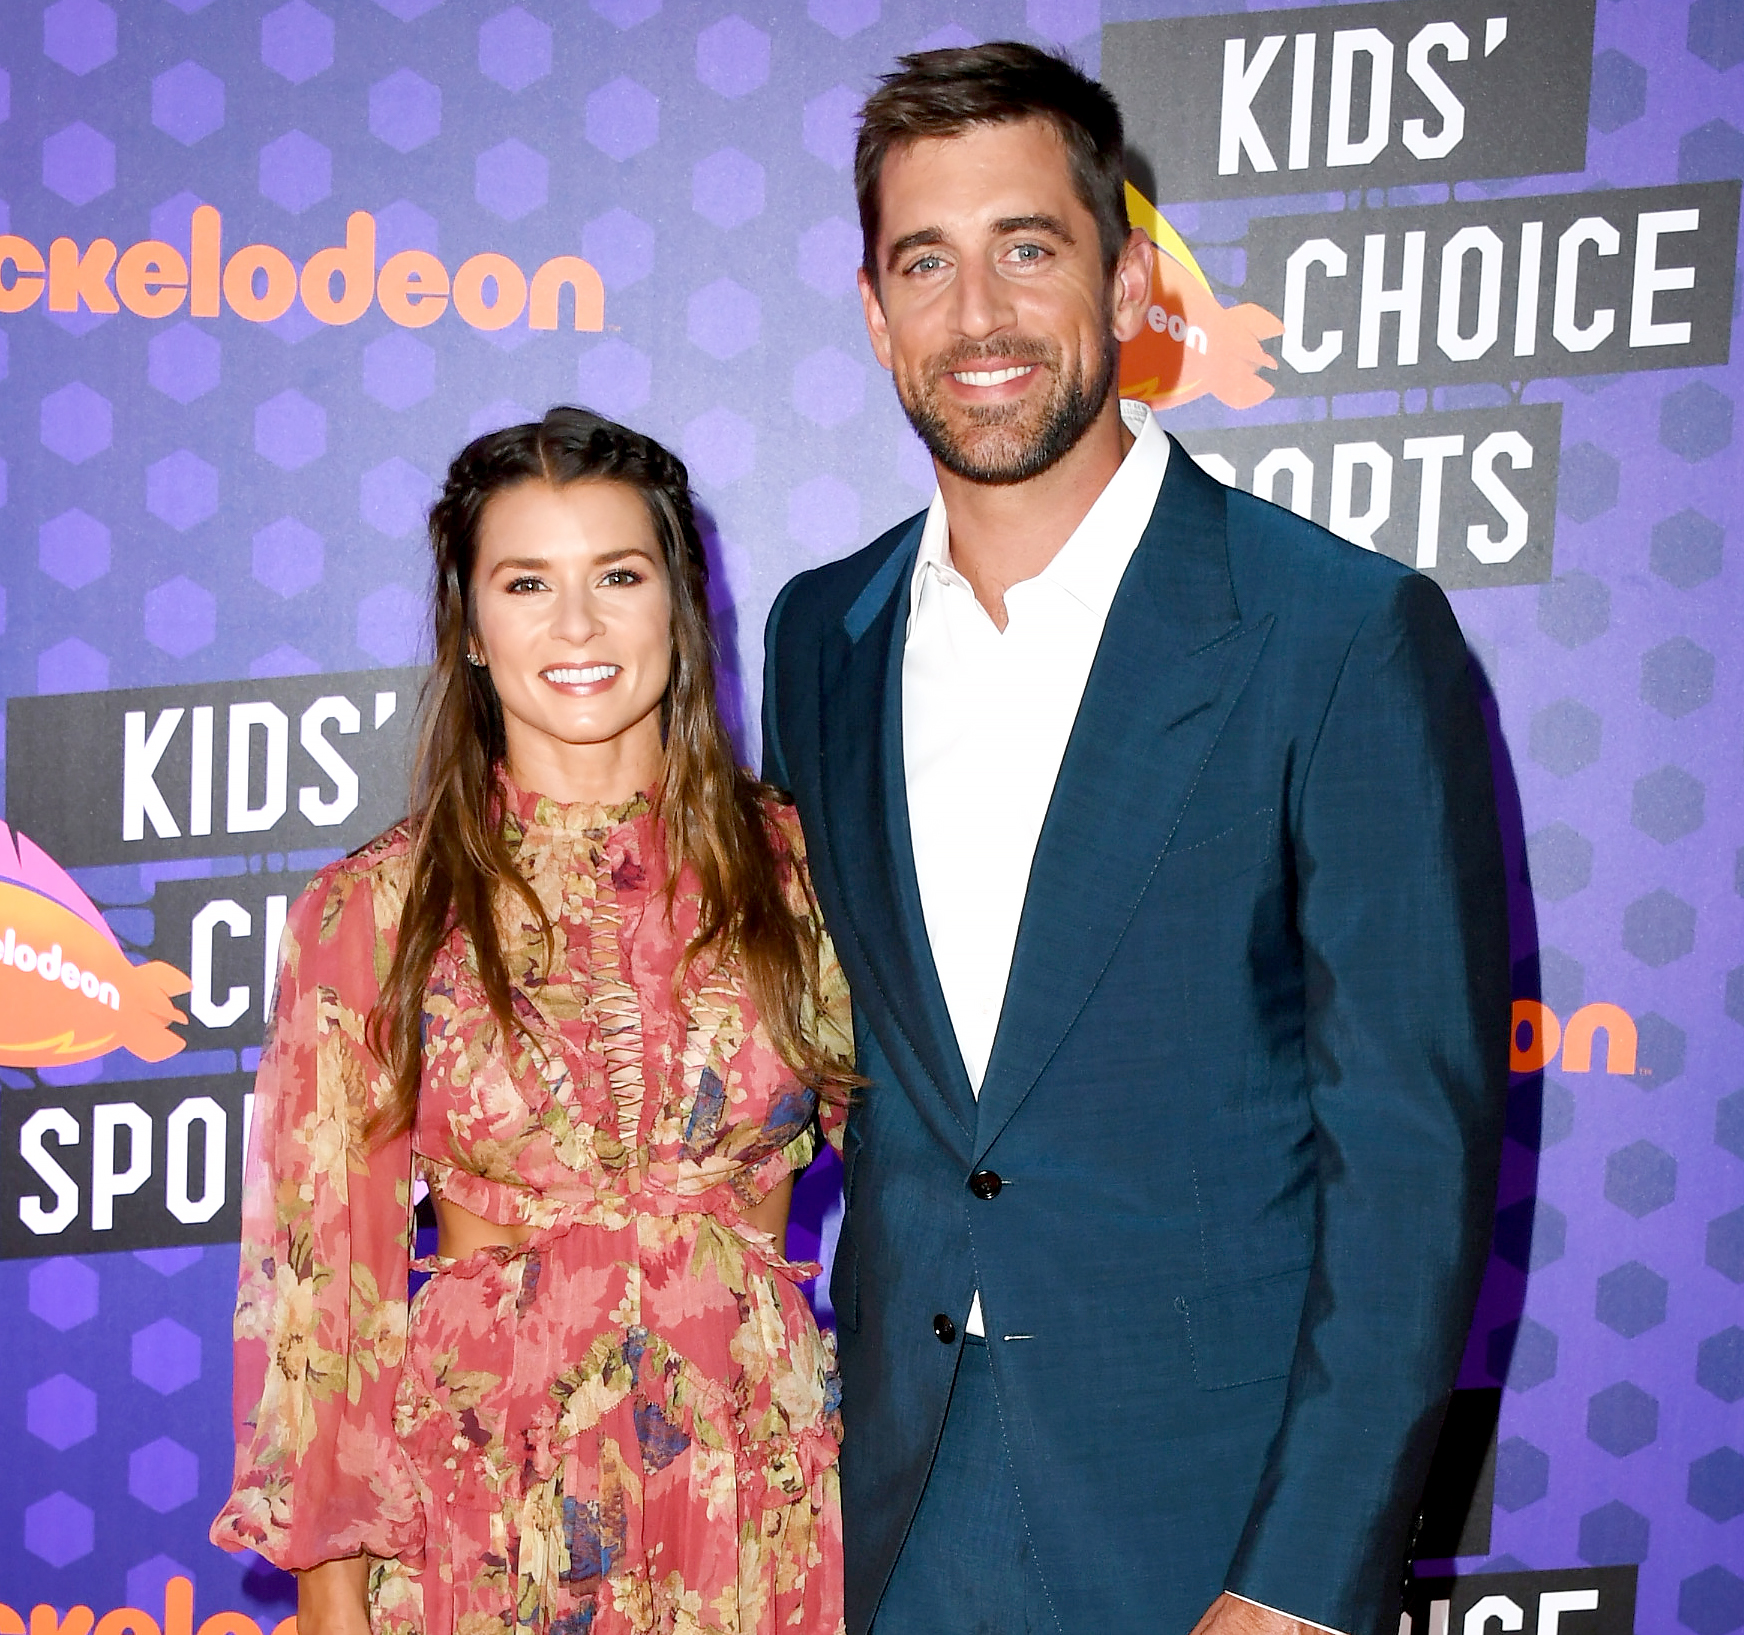 Danica-Patrick-and-Aaron-Rodgers-sports.